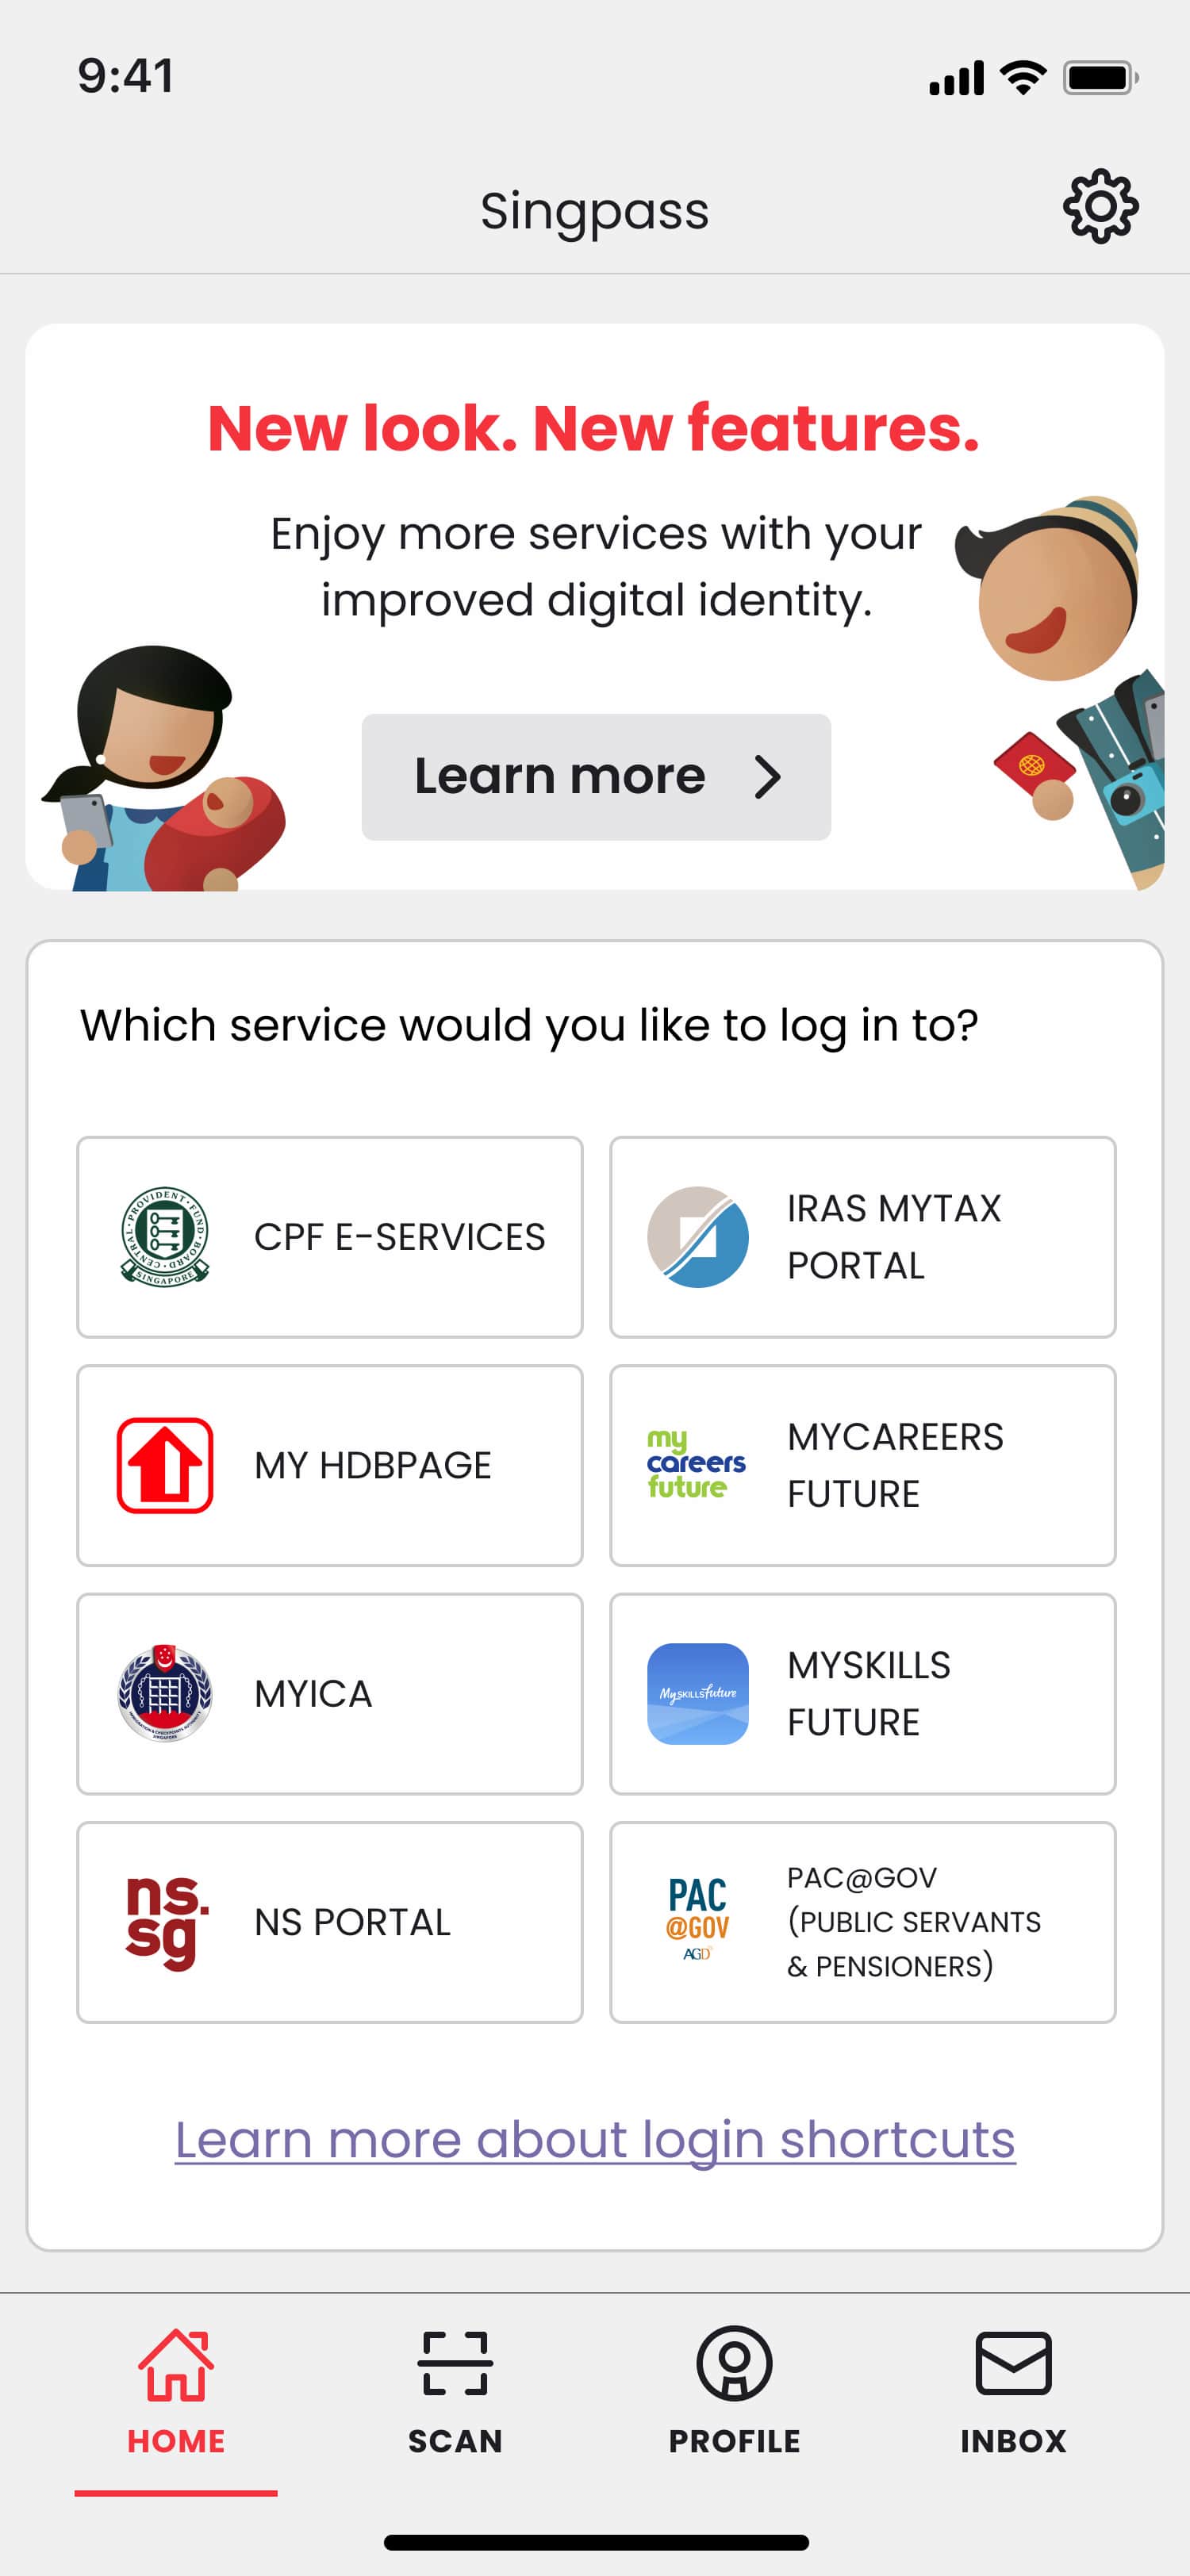 Singpass new home screen designed for easy access to different government services